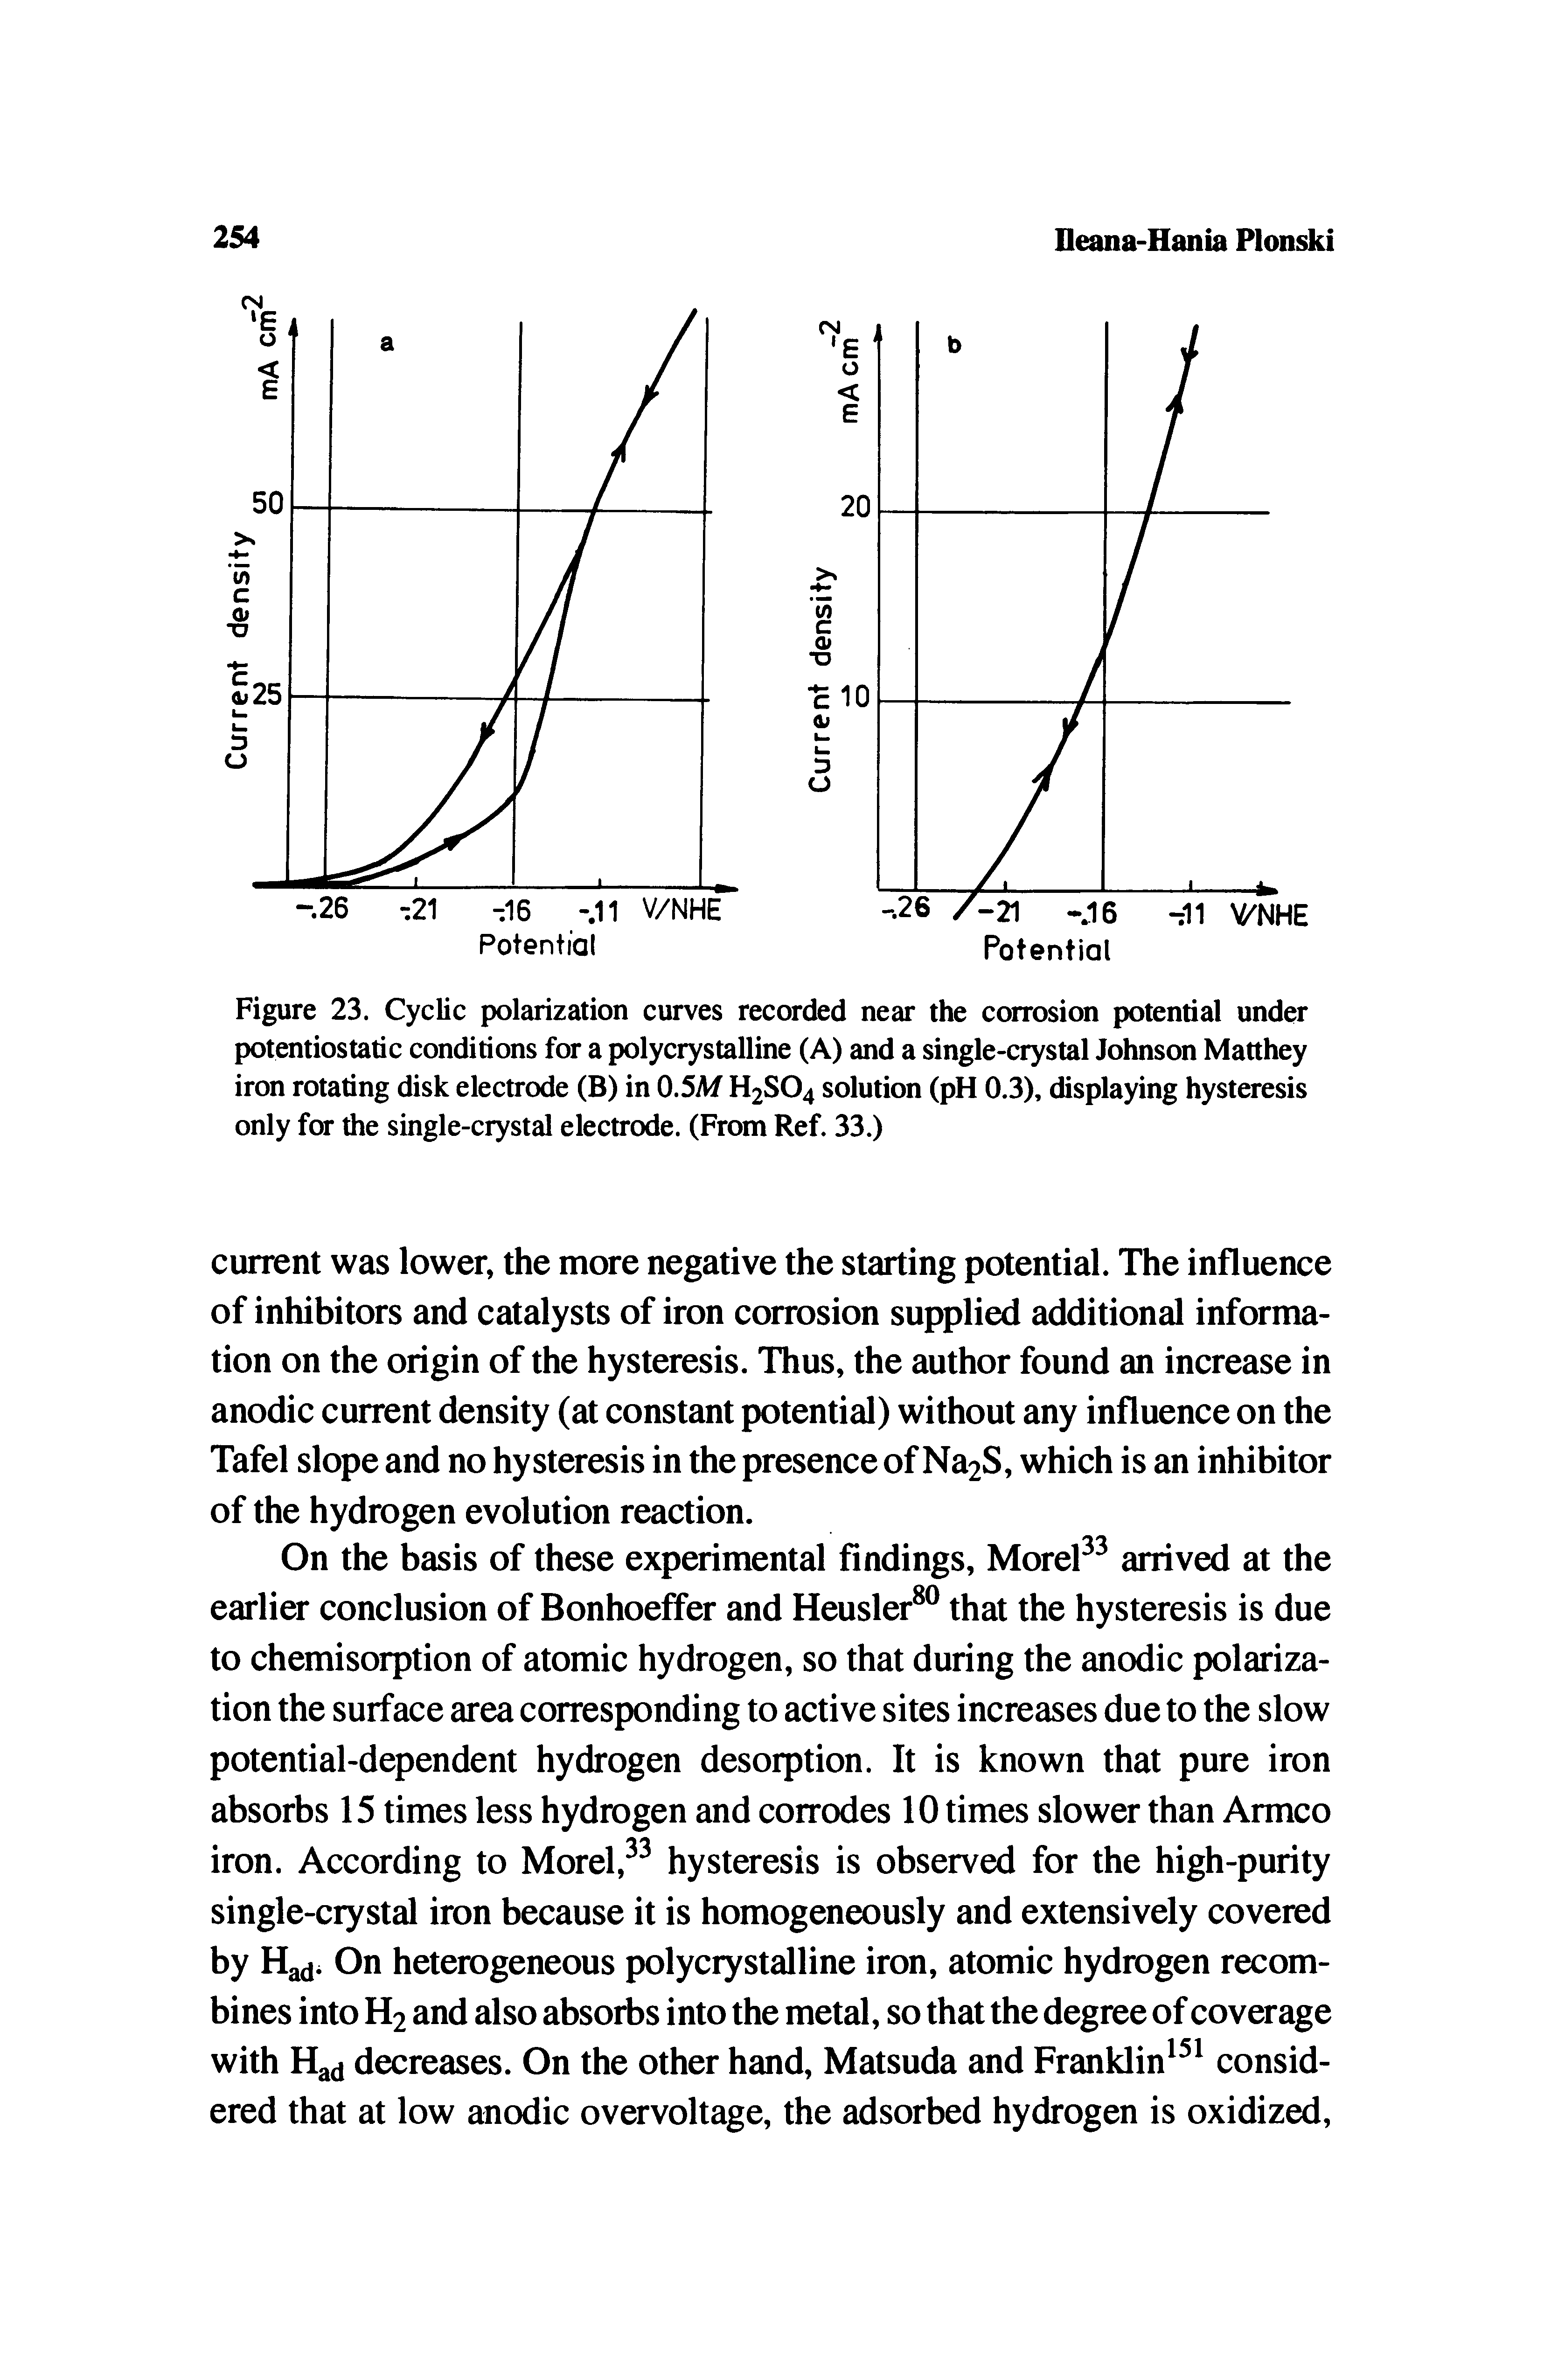 Figure 23. Cyclic polarization curves recorded near the corrosion potential under potentiostatic conditions for a polycrystalline (A) and a single-crystal Johnson Matthey iron rotating disk electrode (B) in 0.5M H2SO4 solution (pH 0.3), displaying hysteresis only for the single-crystal electrode. (From Ref. 33.)...